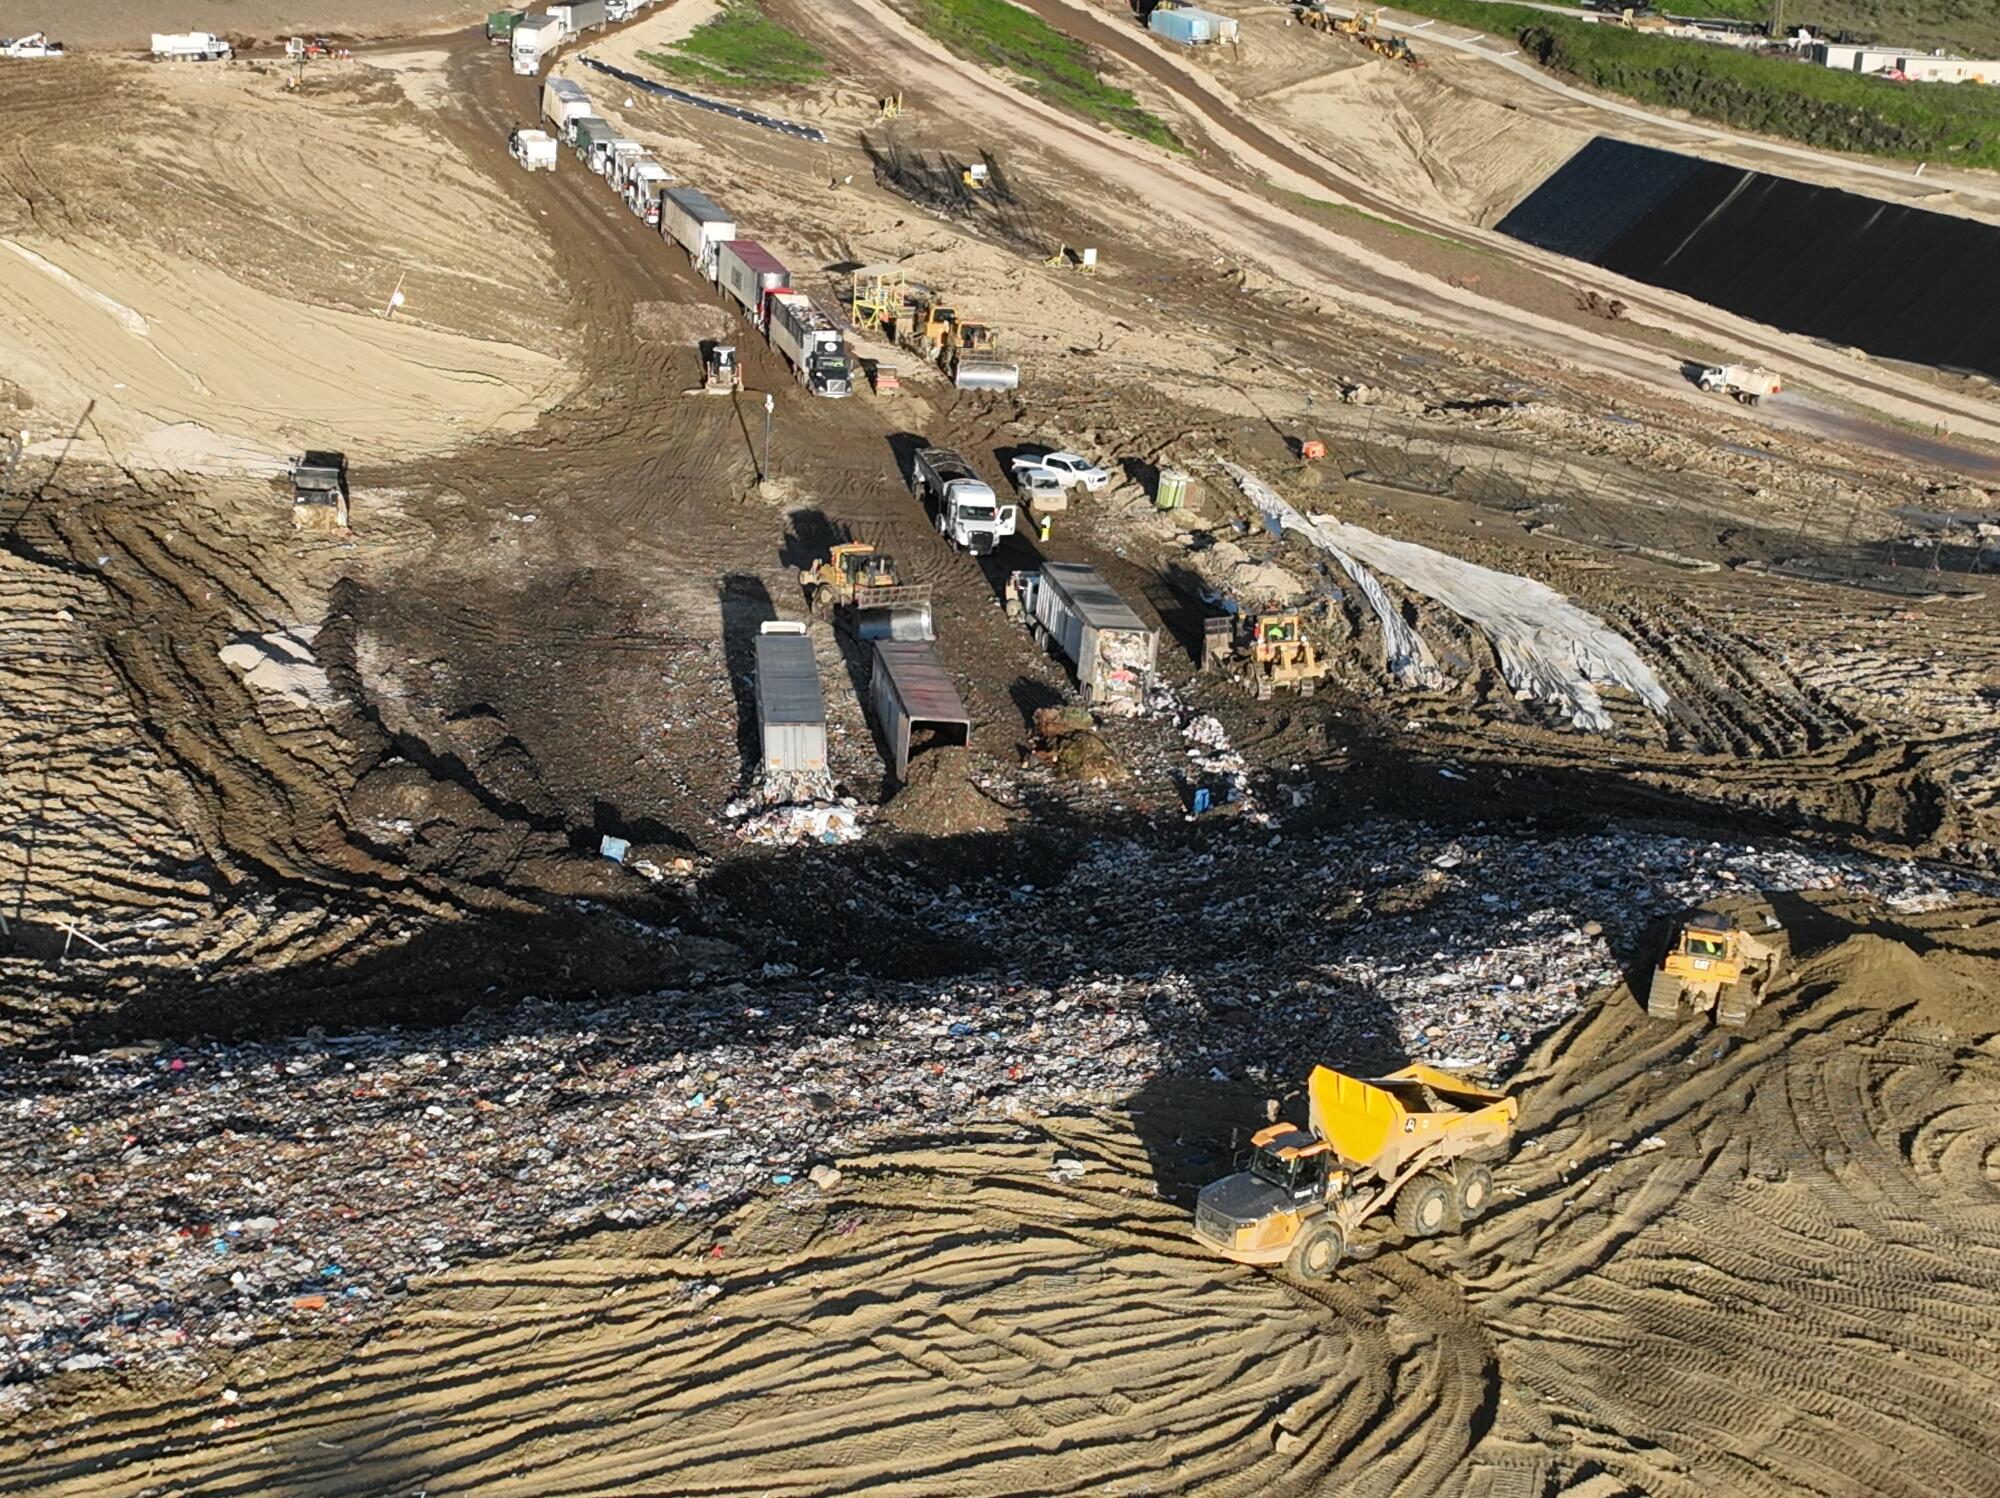 An aerial view of trucks unloading, heavy equipment spreading trash over at Chiquita Canyon Landfill in Castaic.